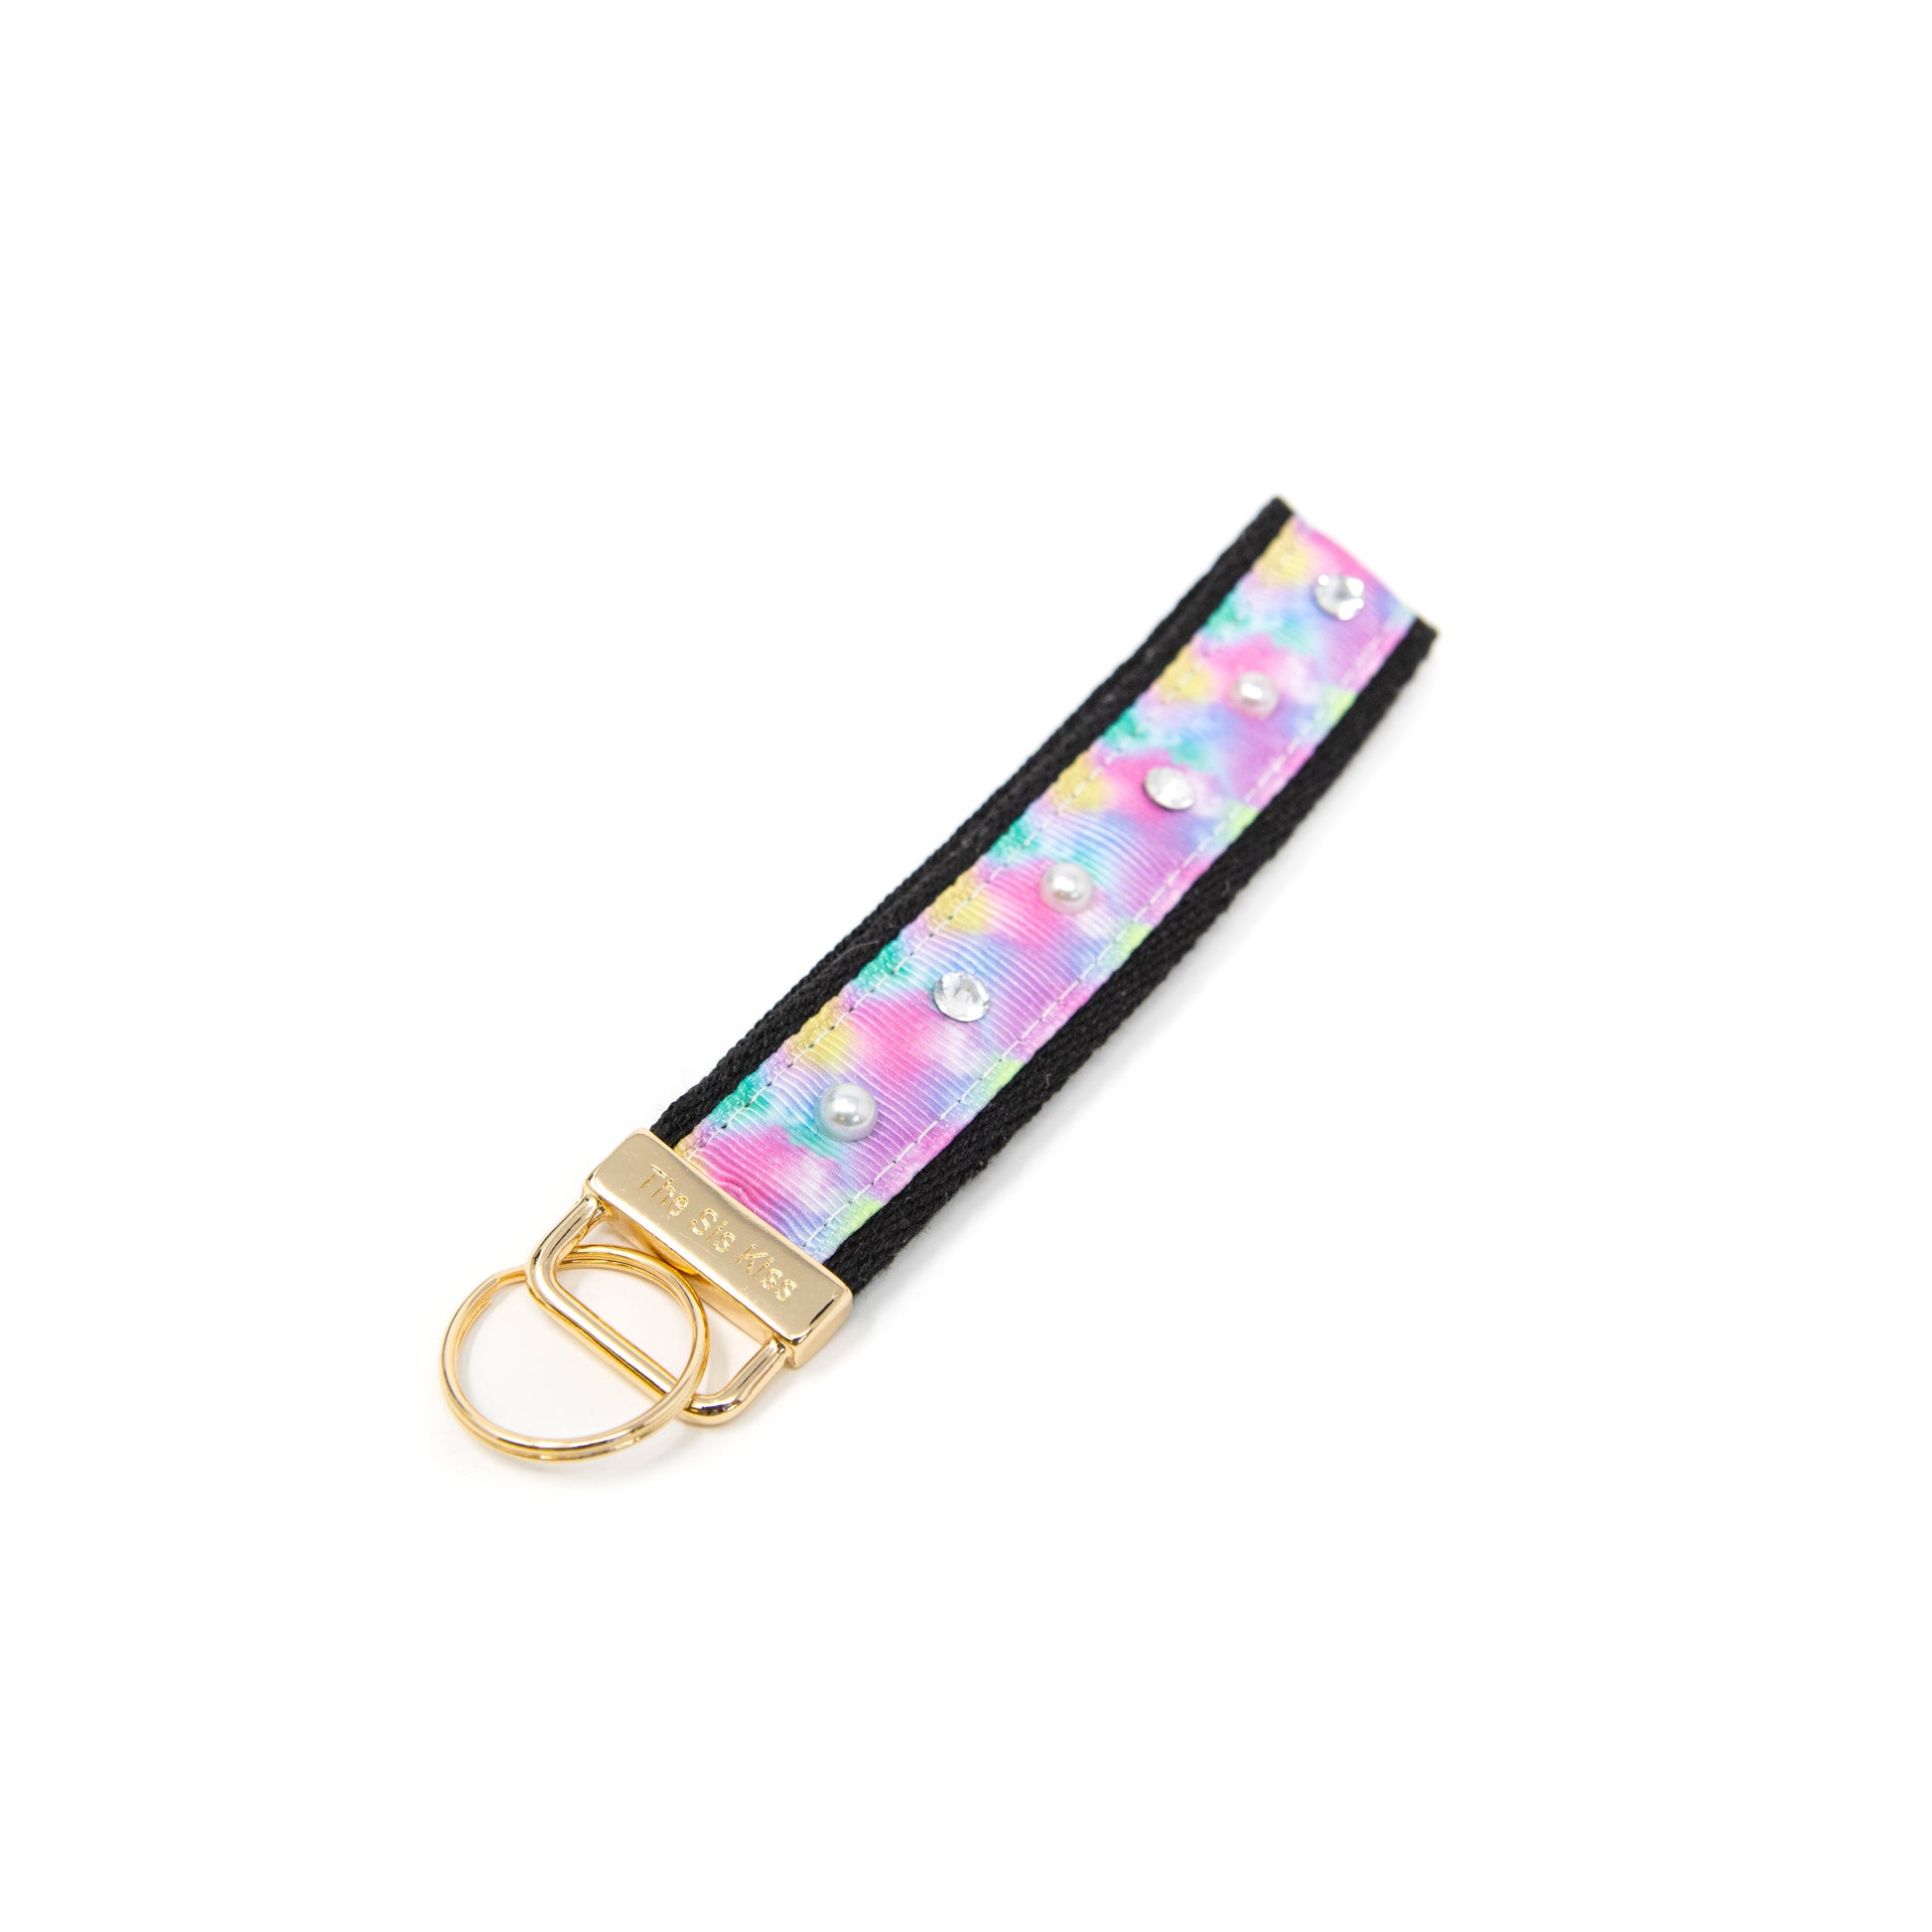 Leopard and Tie Dye Keychains ACCESSORY The Sis Kiss Pastel Tie Dye